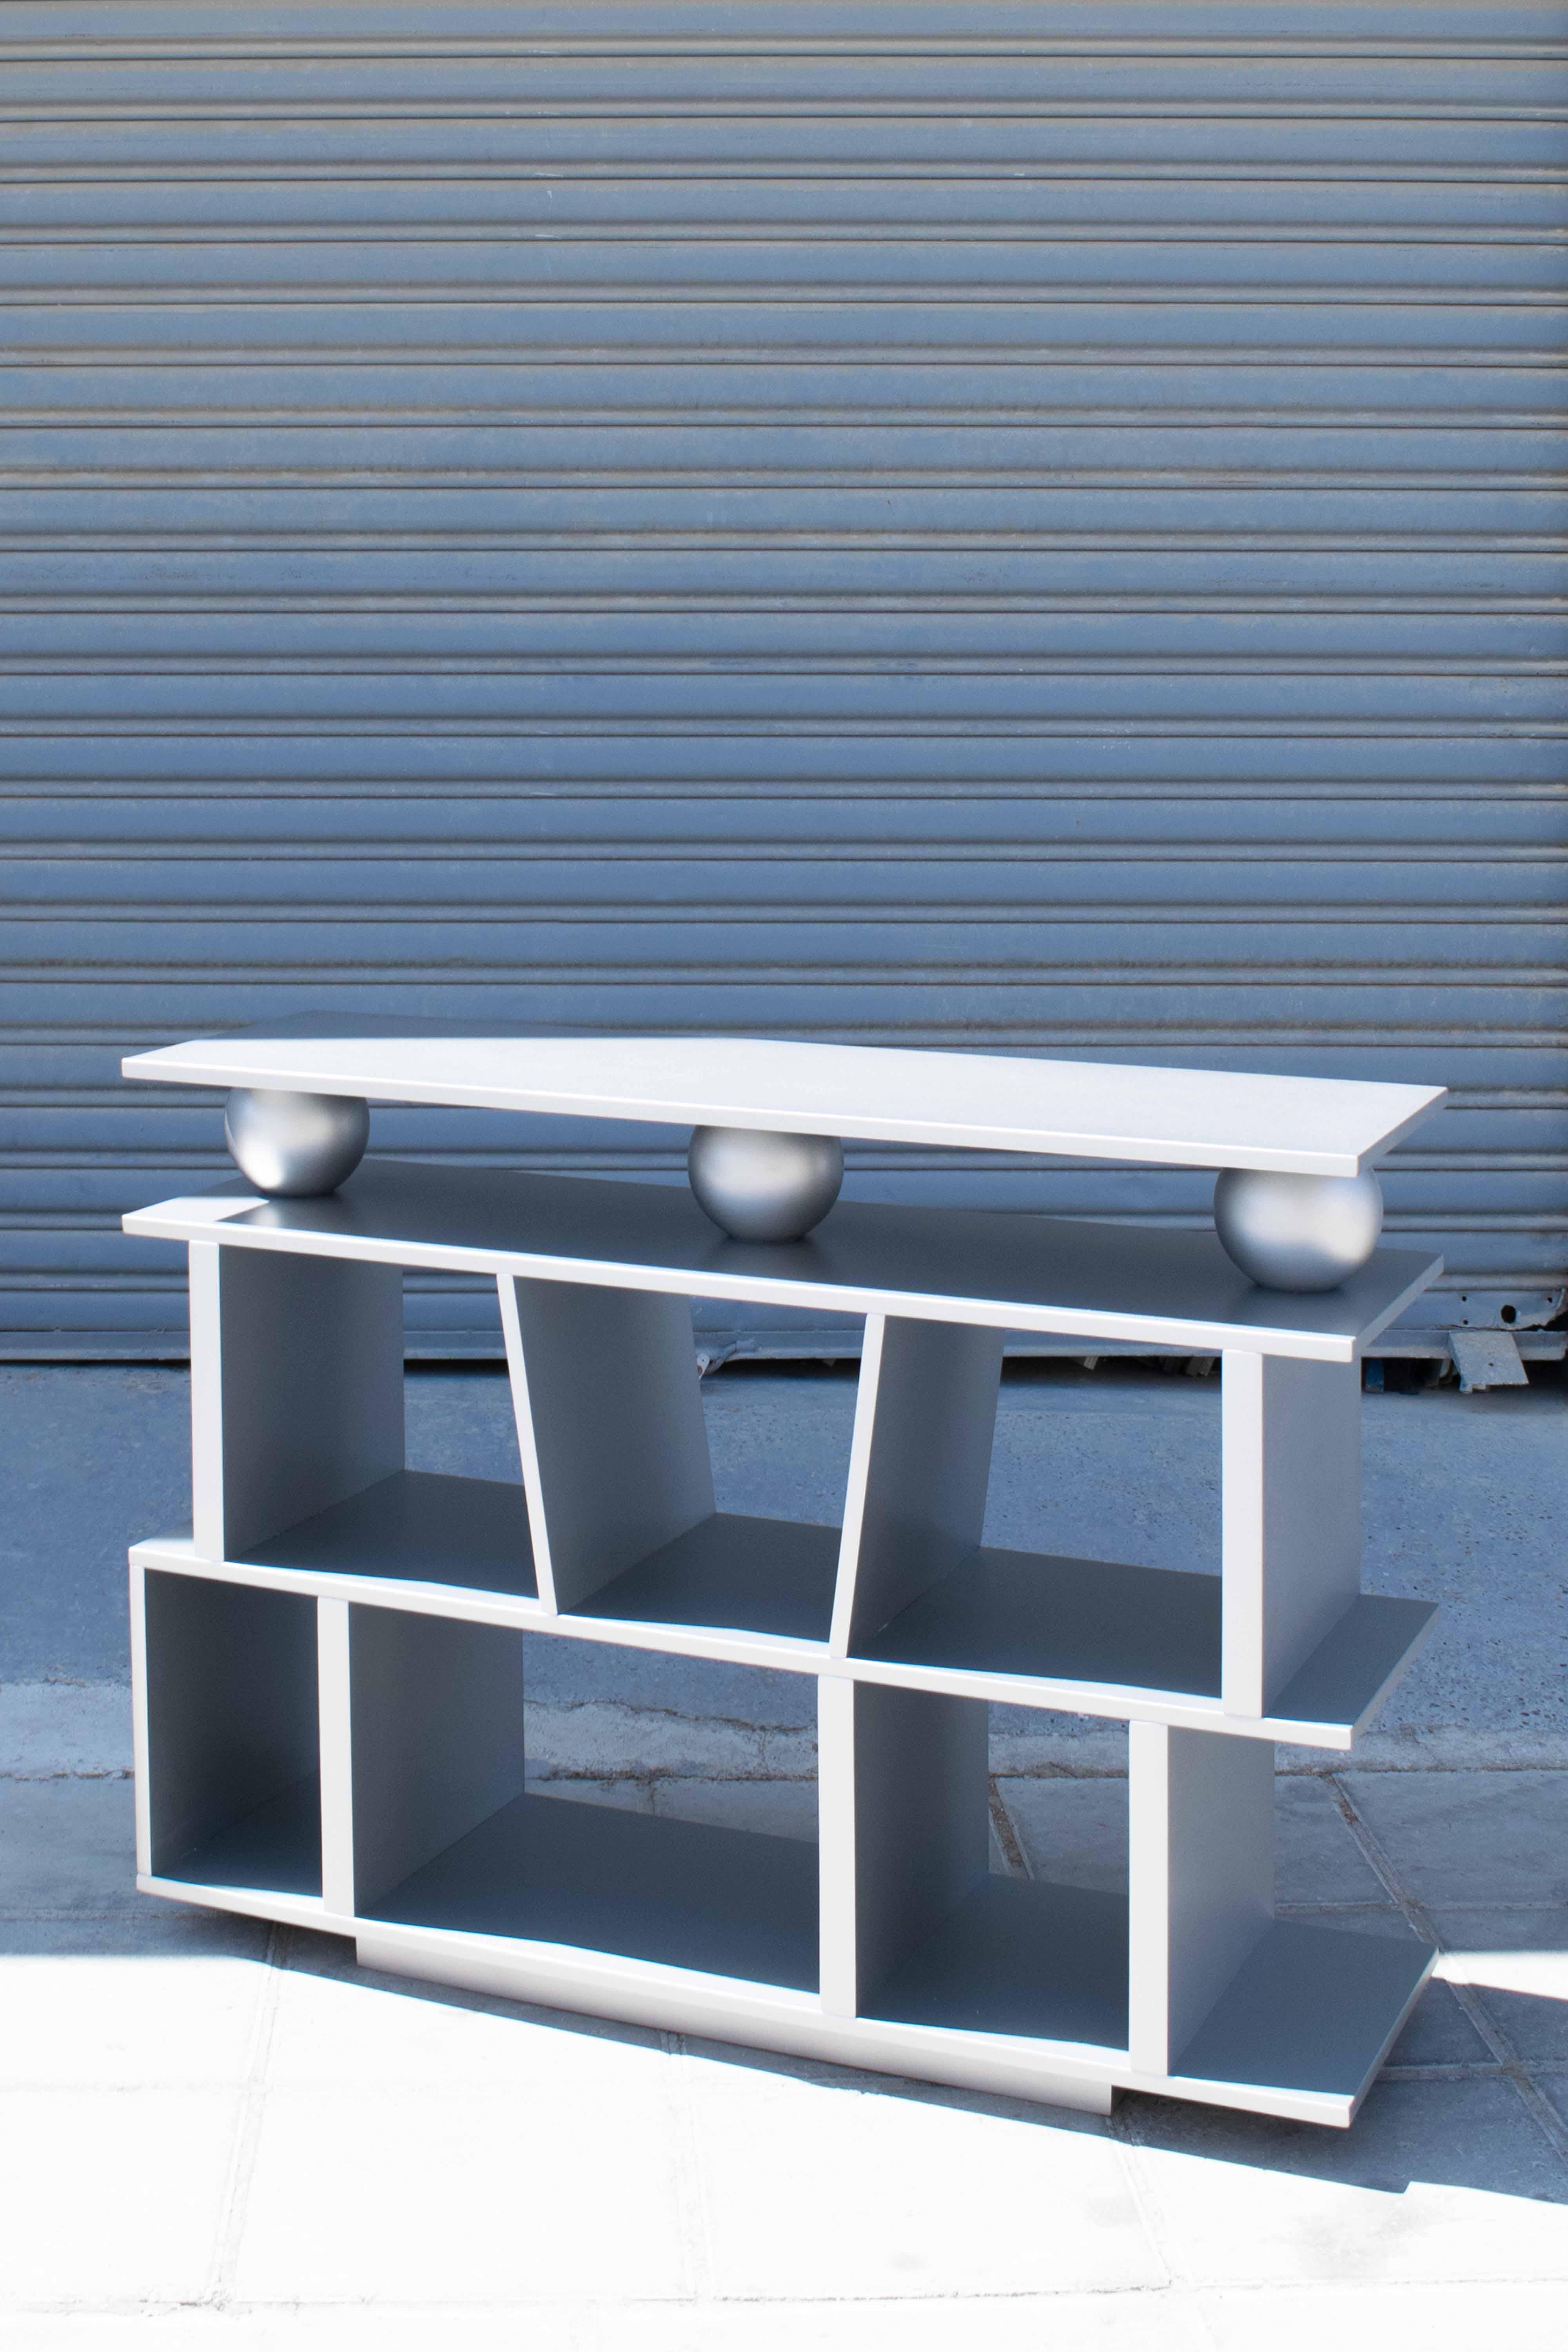 Silver Console Table / Dj Box for Turntables and Vinyls In New Condition For Sale In Larnaca, CY